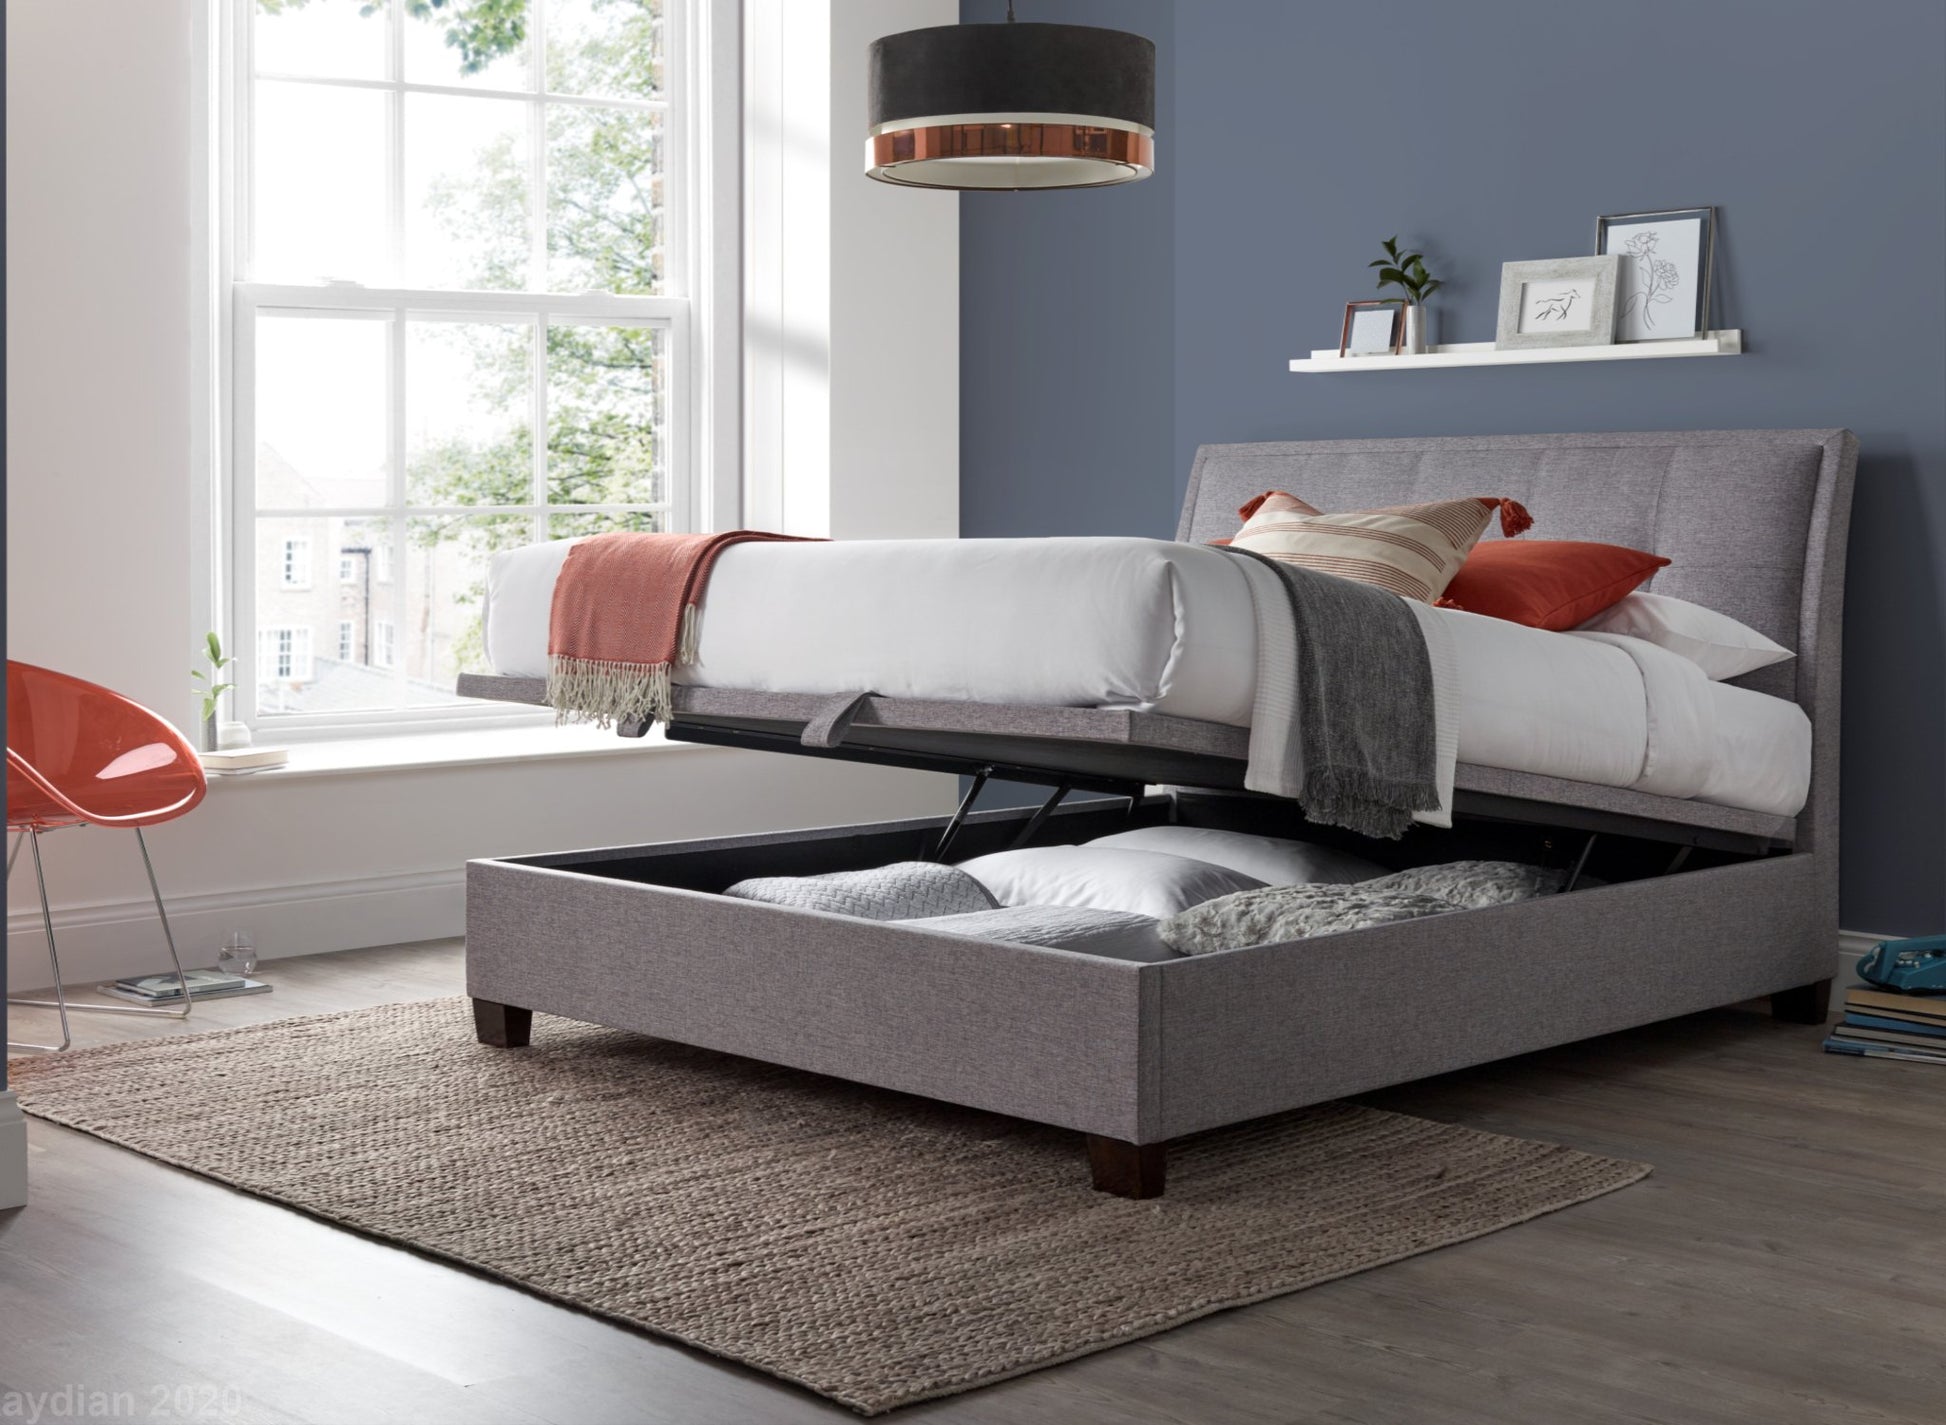 Accent Ottoman Storage Bed Frame - Oatmeal - TV Beds Northwest - ACC135OA - doubleottoman - doubleottomanstorage